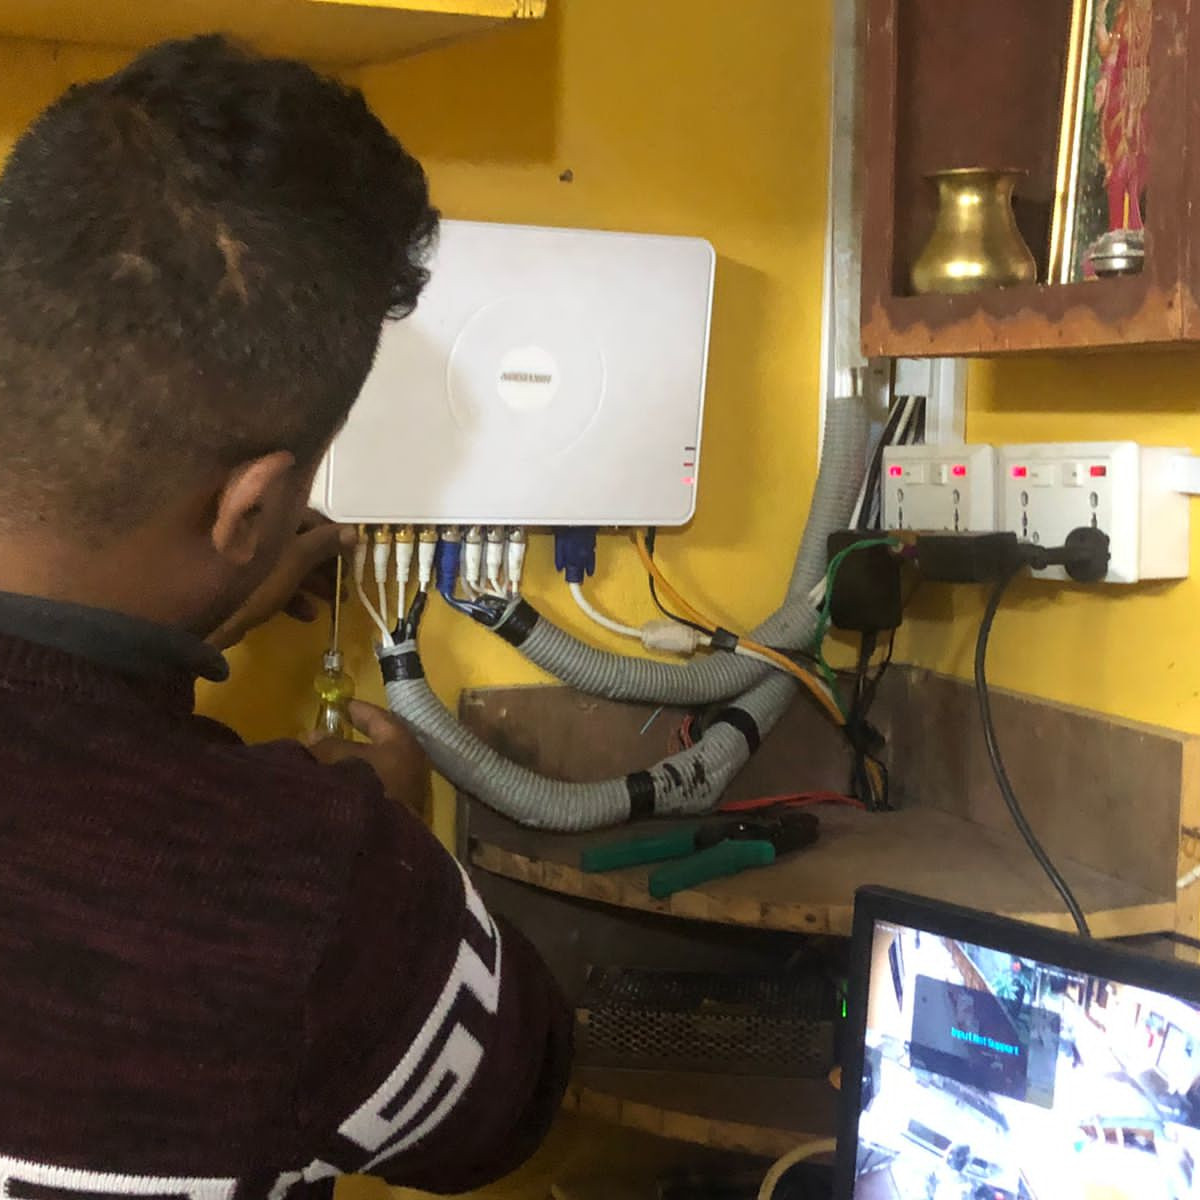 CCTV Security Installation: Staff Installing DVR and plugging camera cables